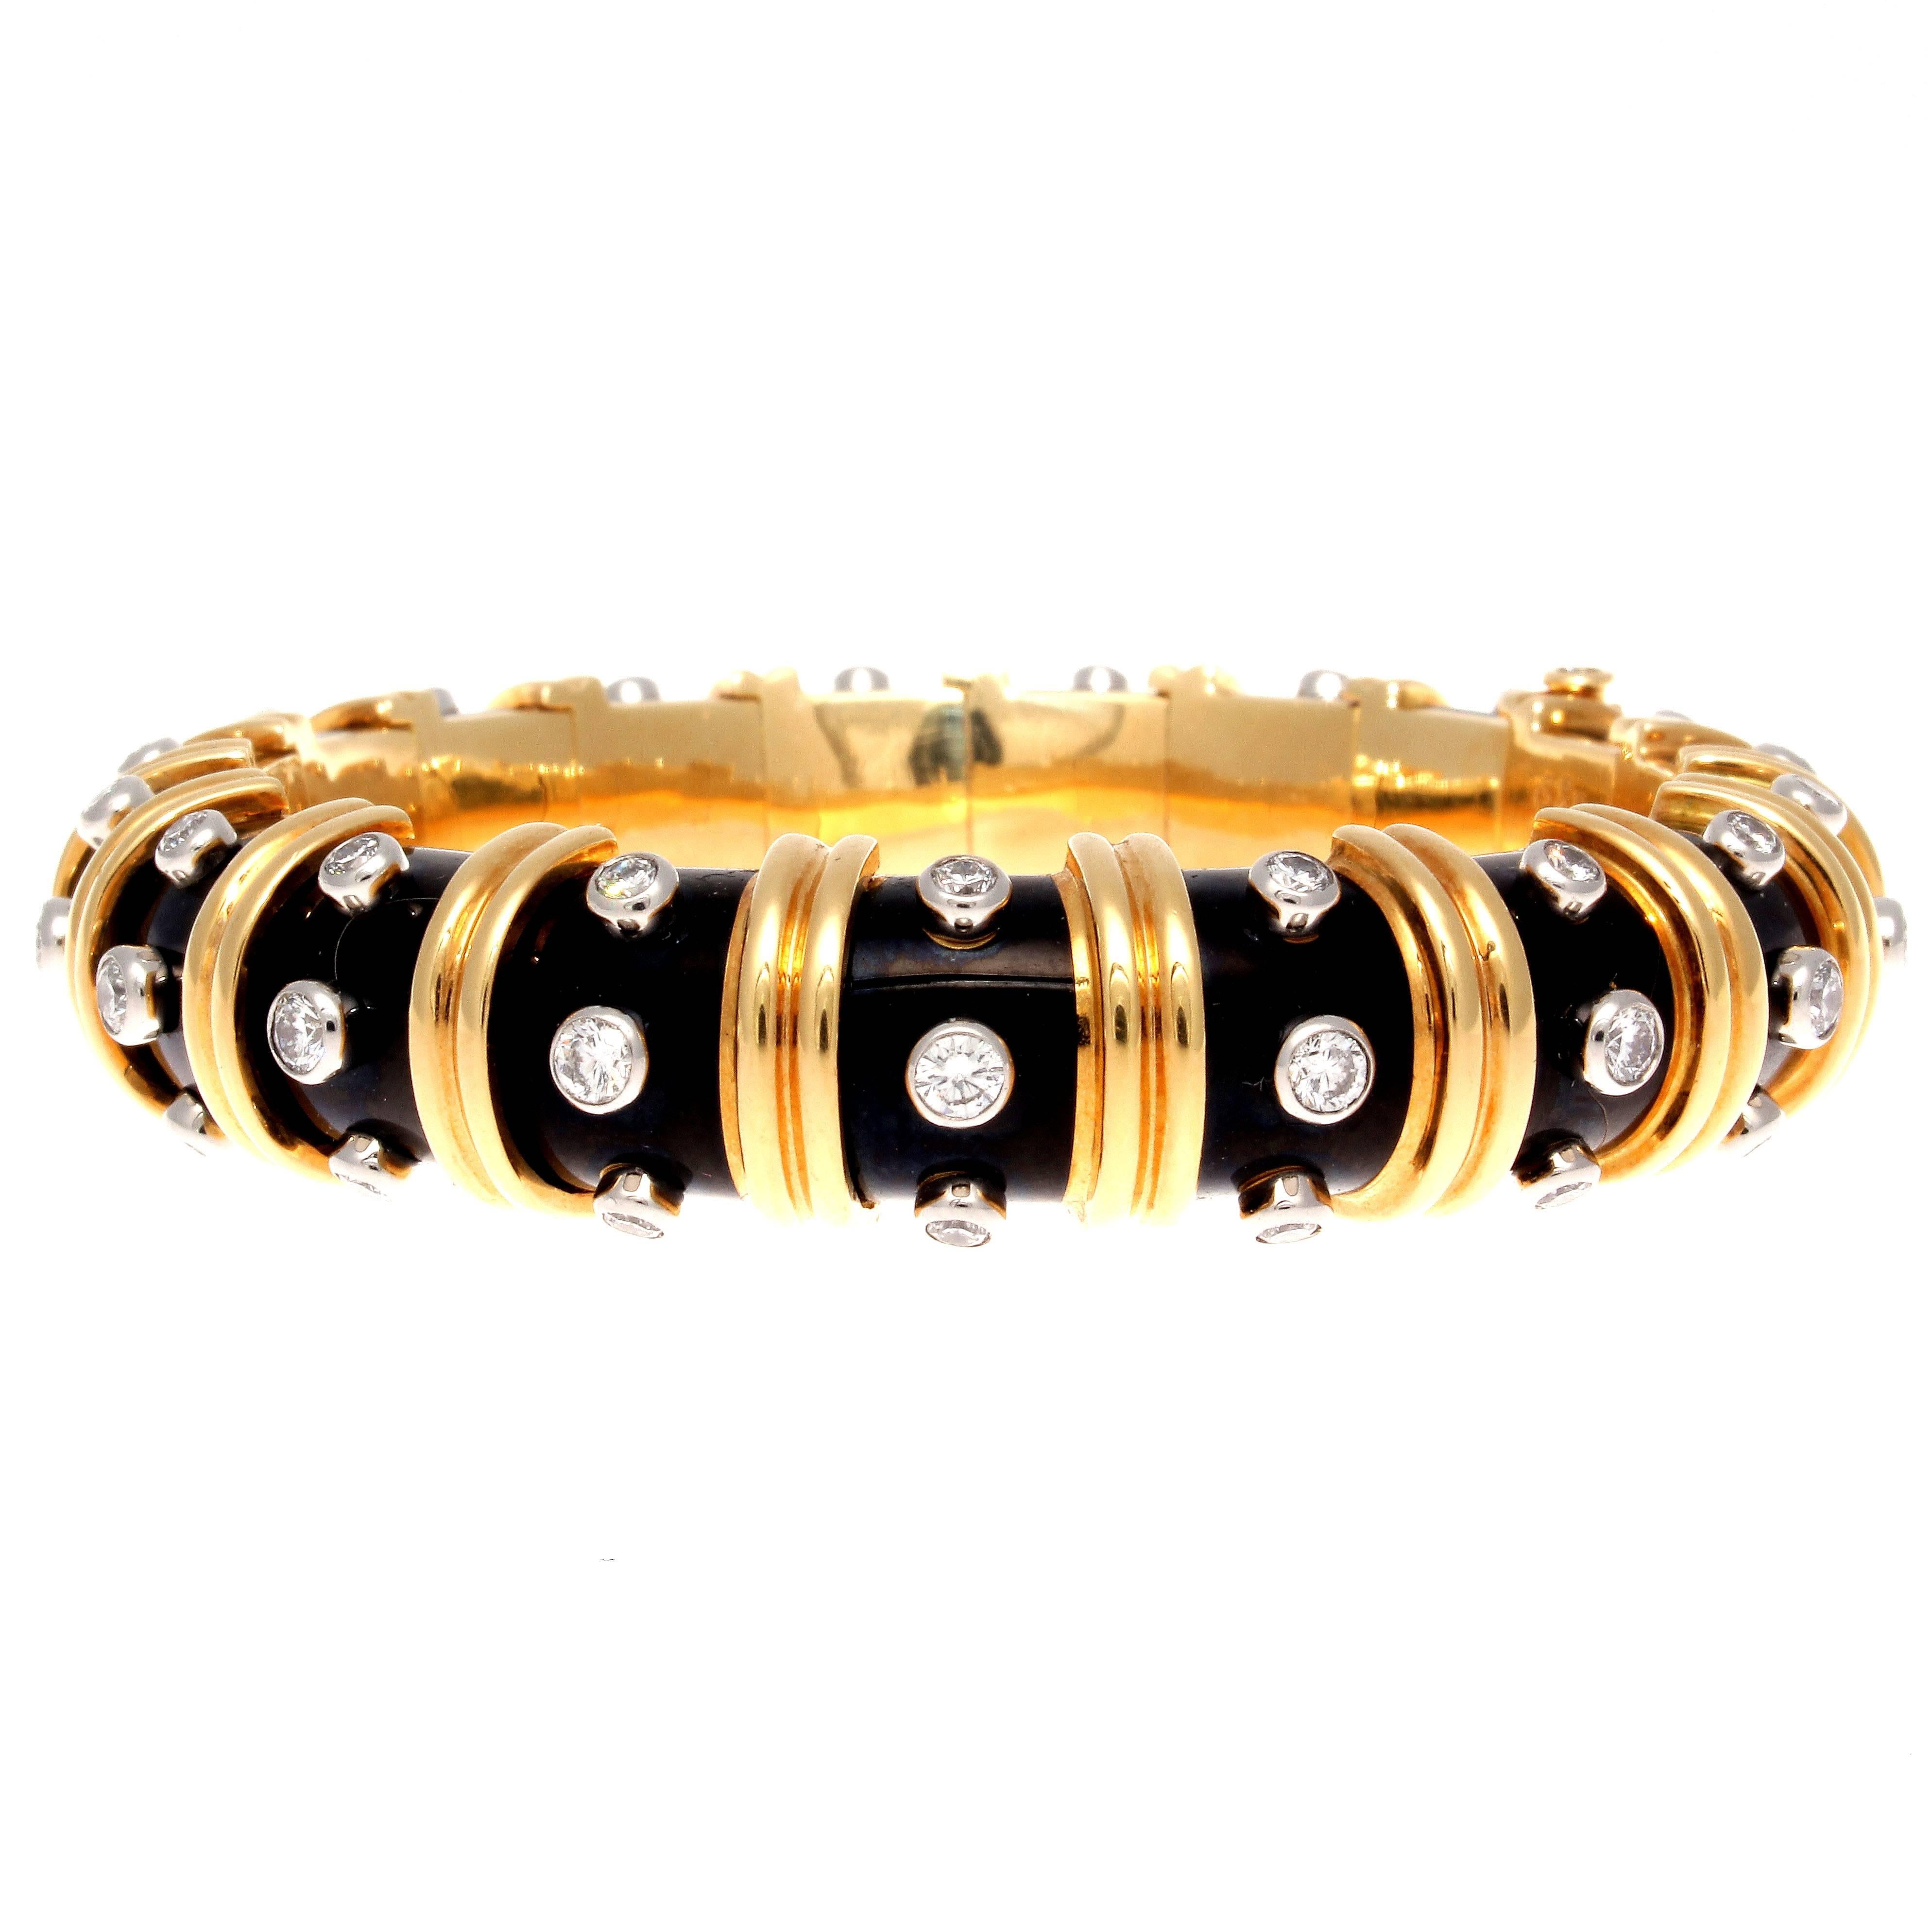 Creativity and superior design is innate to Jean Schlumberger creations for Tiffany. This striking onyx Paillone bangle bracelet features one of the best combinations of color in jewelry. Created with distinct jet black enamel, partitioned by ribs